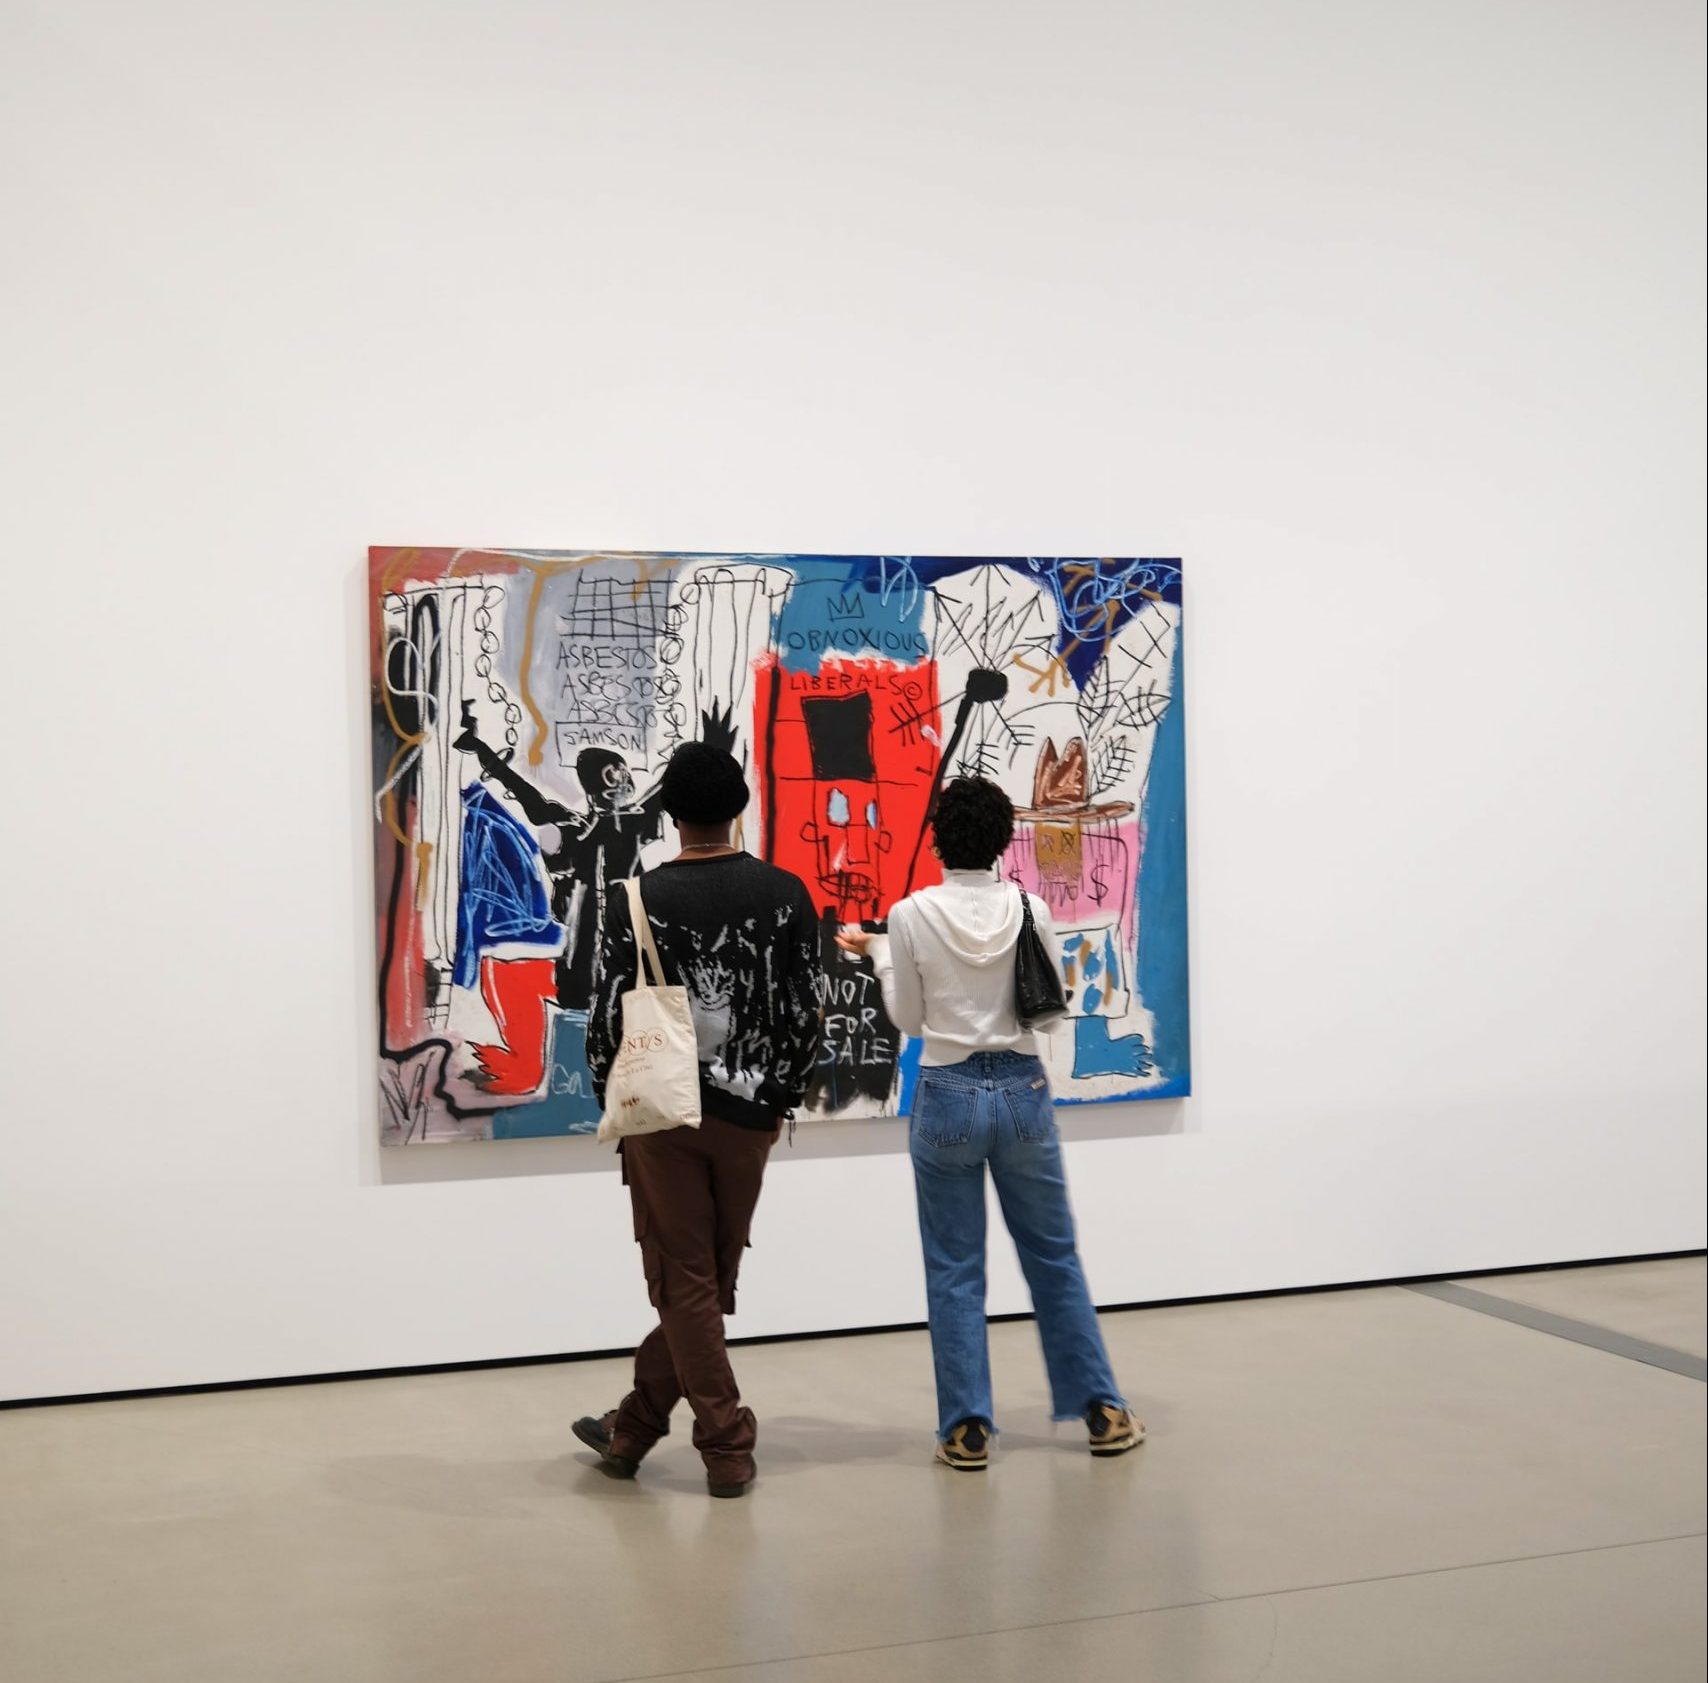 The 110 Million-Dollar Painting: Who was Jean-Michel Basquiat?